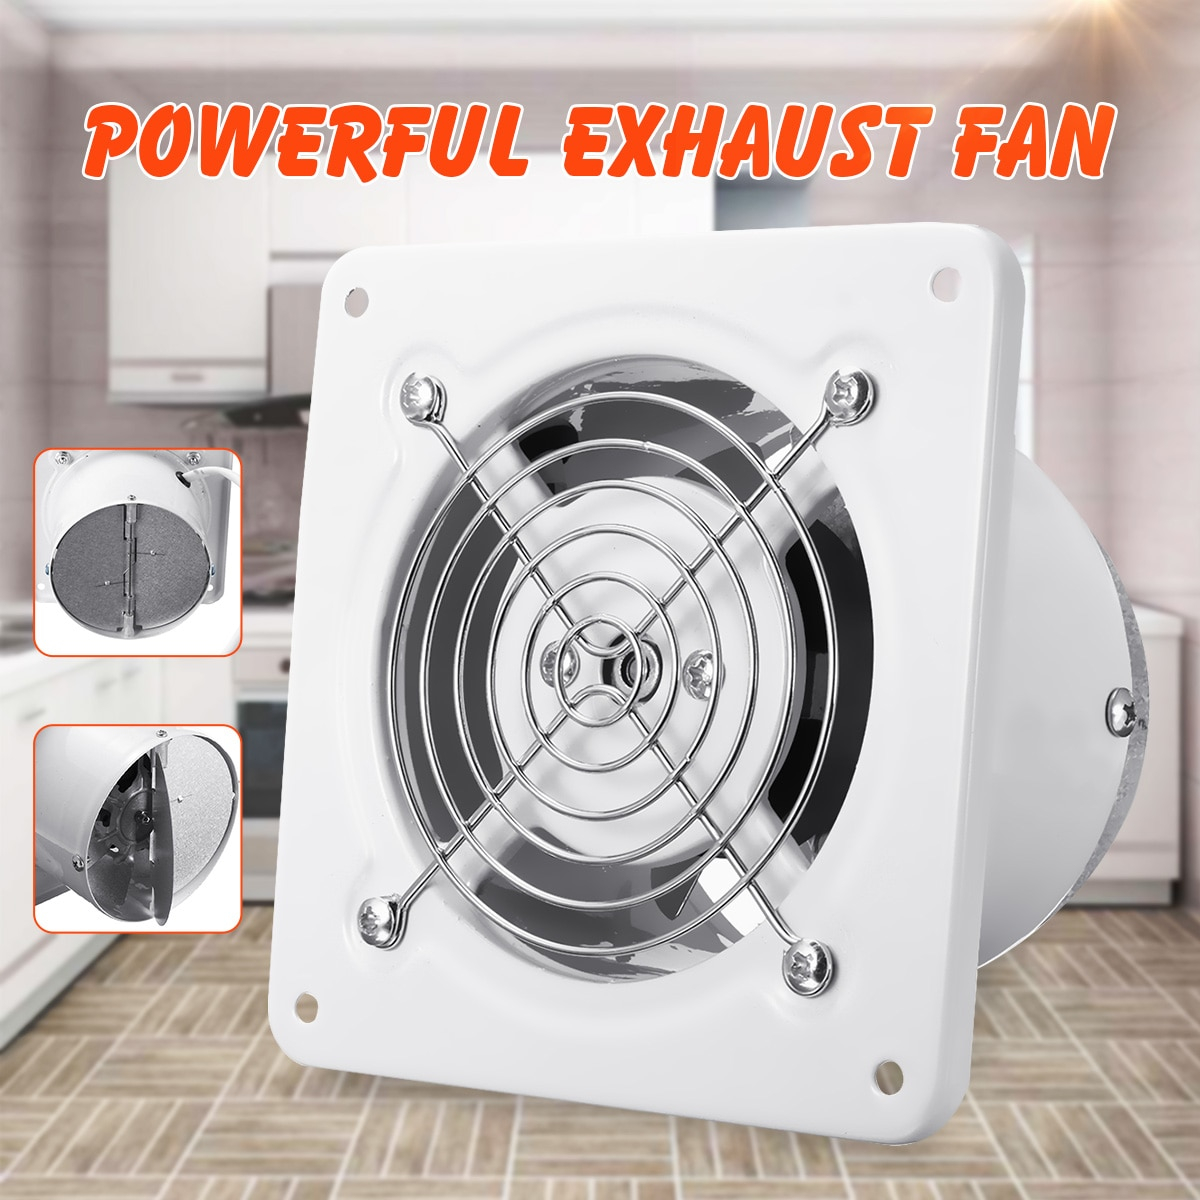 Us 1276 42 Off4 Inch 20w 220v Silent Exhaust Fan Kitchen Bathroom Toilet Window Wall Ventilation Exhaust Blower Air Cleaning Cooling Vent in dimensions 1200 X 1200